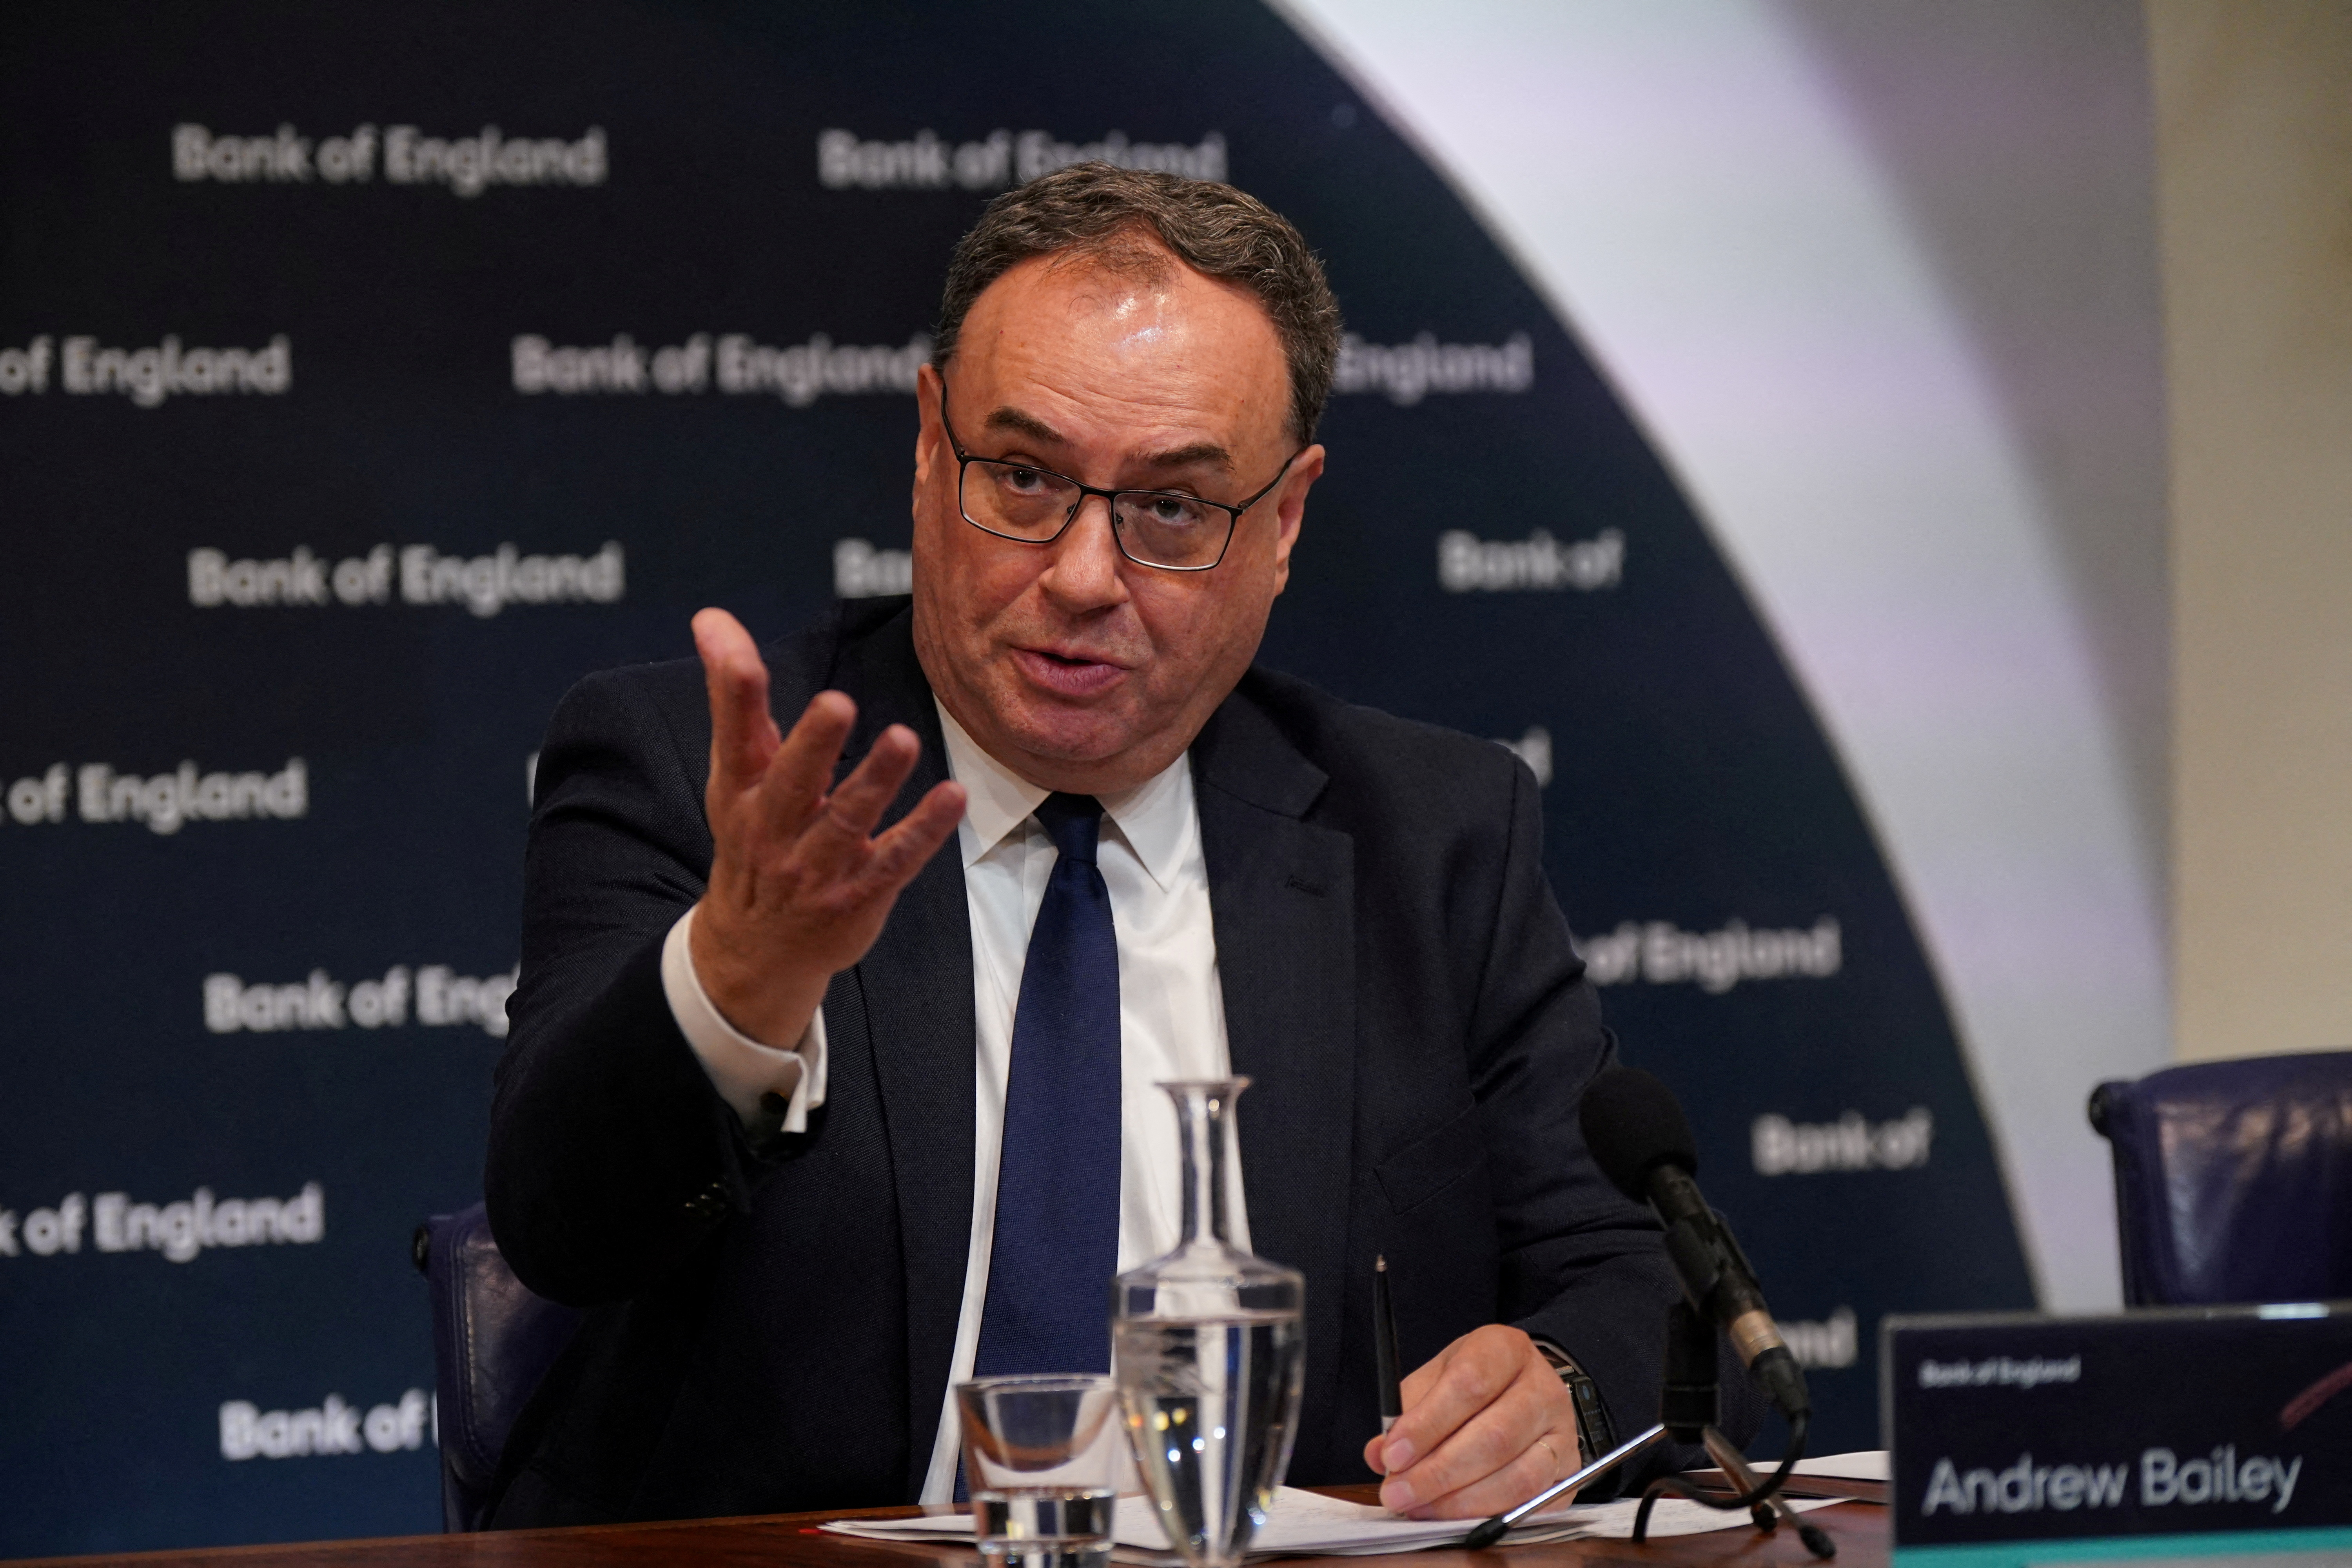 BoE Monetary Policy Report Press Conference in London